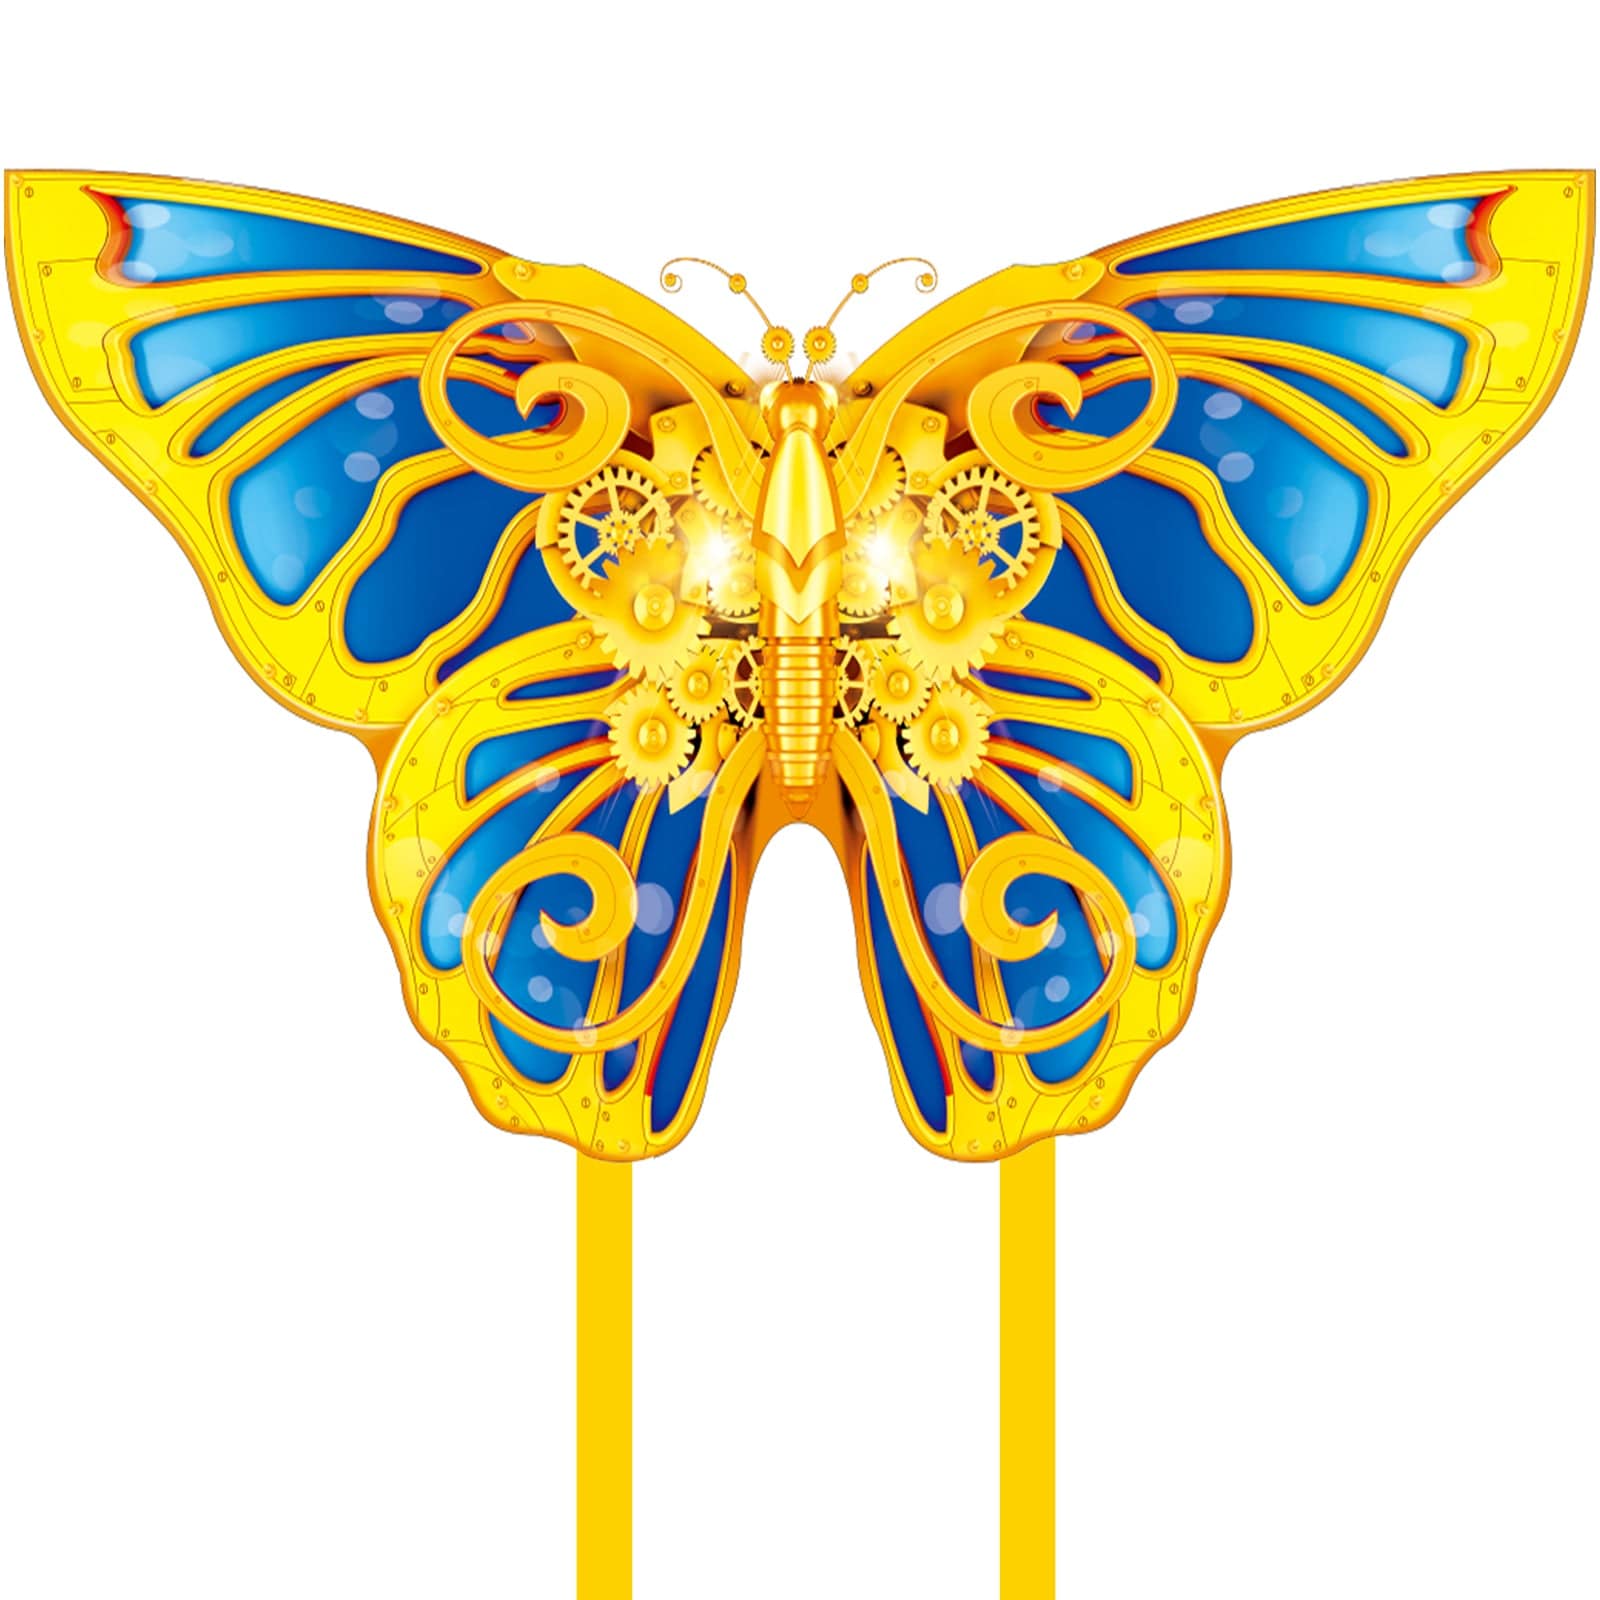 Kangyue Mint's Colorful Life Mechanical Butterfly Kite for Kids & Adults 00191892515939